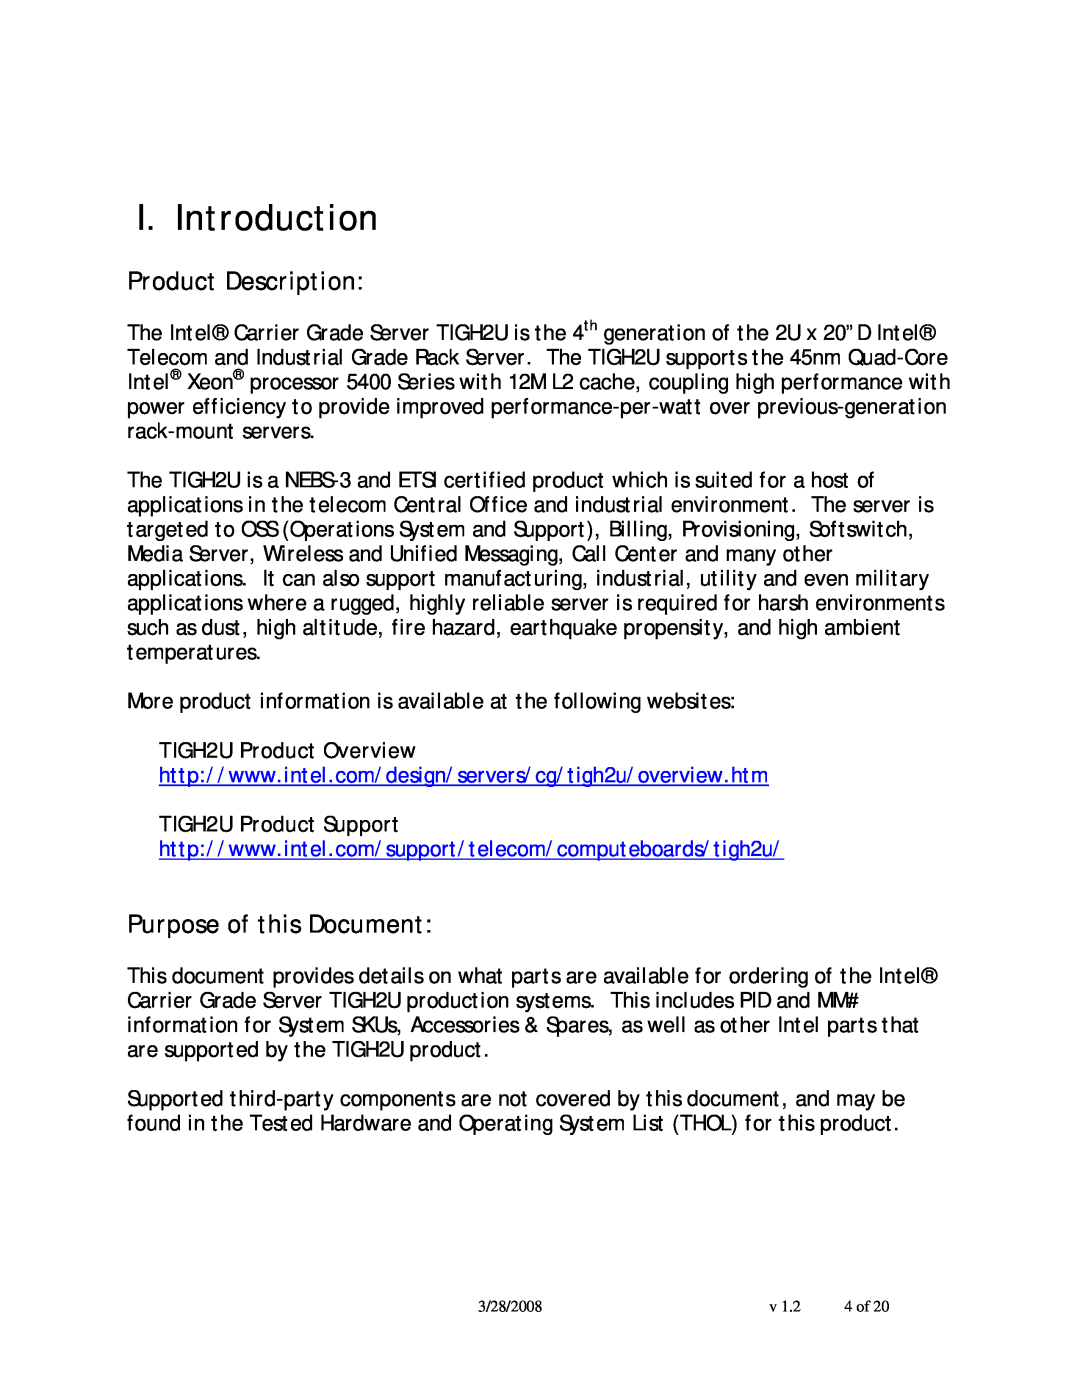 Intel I. Introduction, Product Description, Purpose of this Document, TIGH2U Product Overview, TIGH2U Product Support 